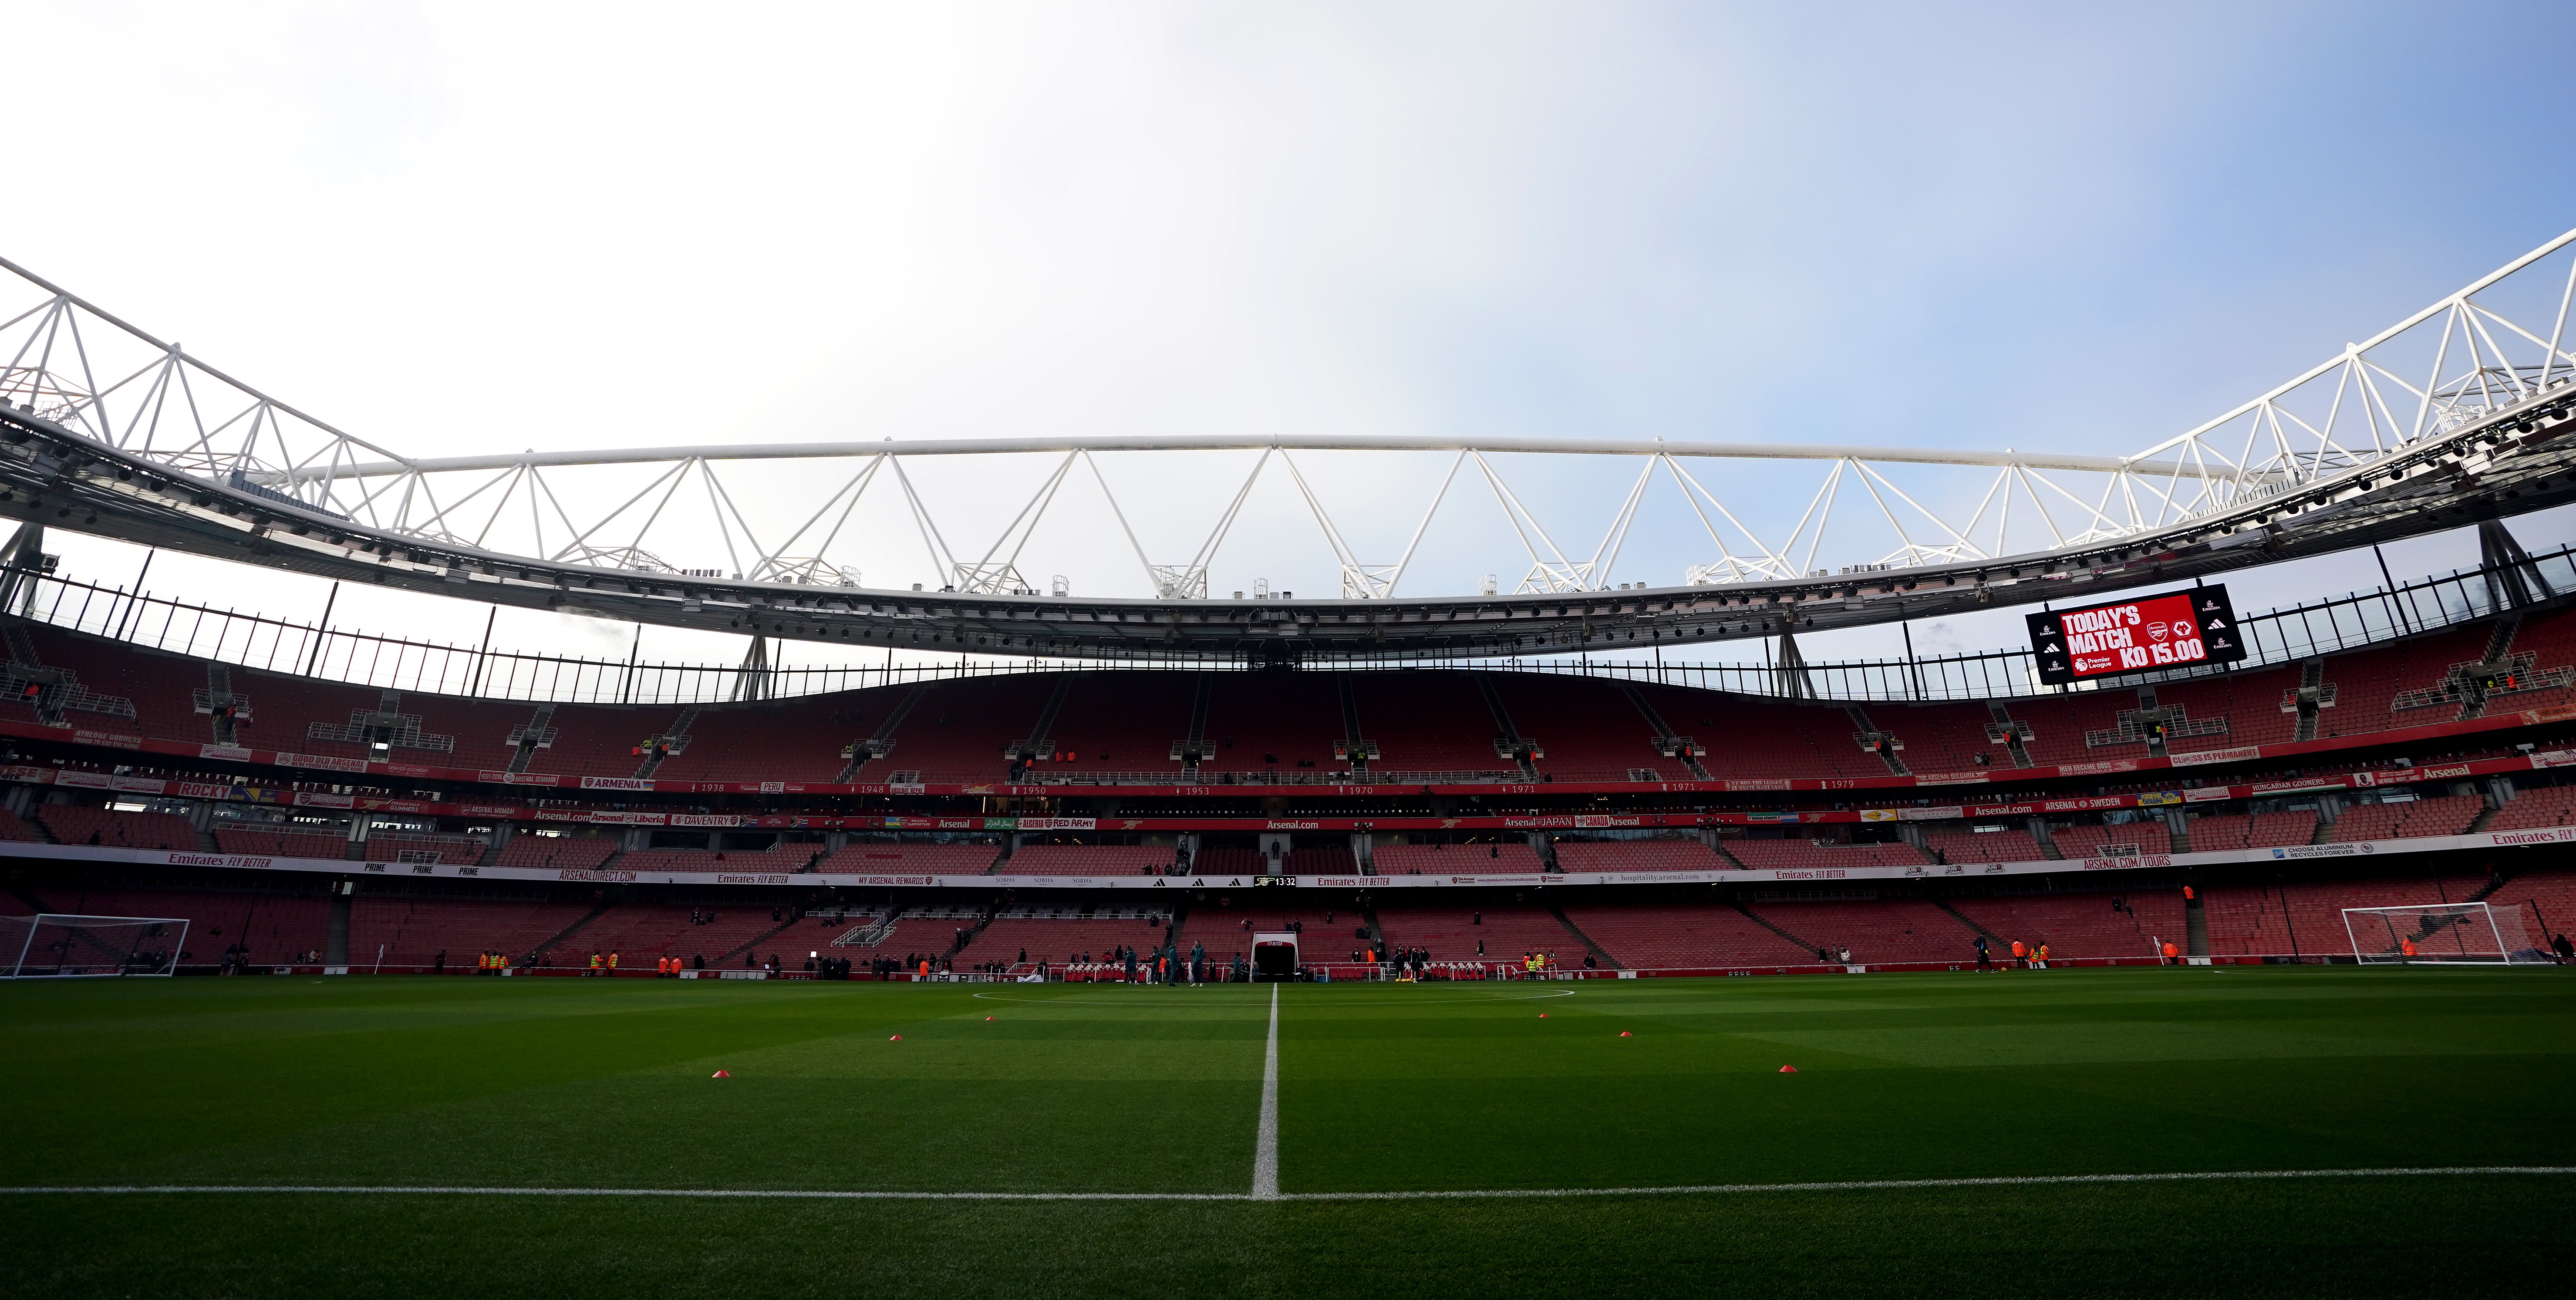 Here's how the Emirates looks now - certainly less cosy!